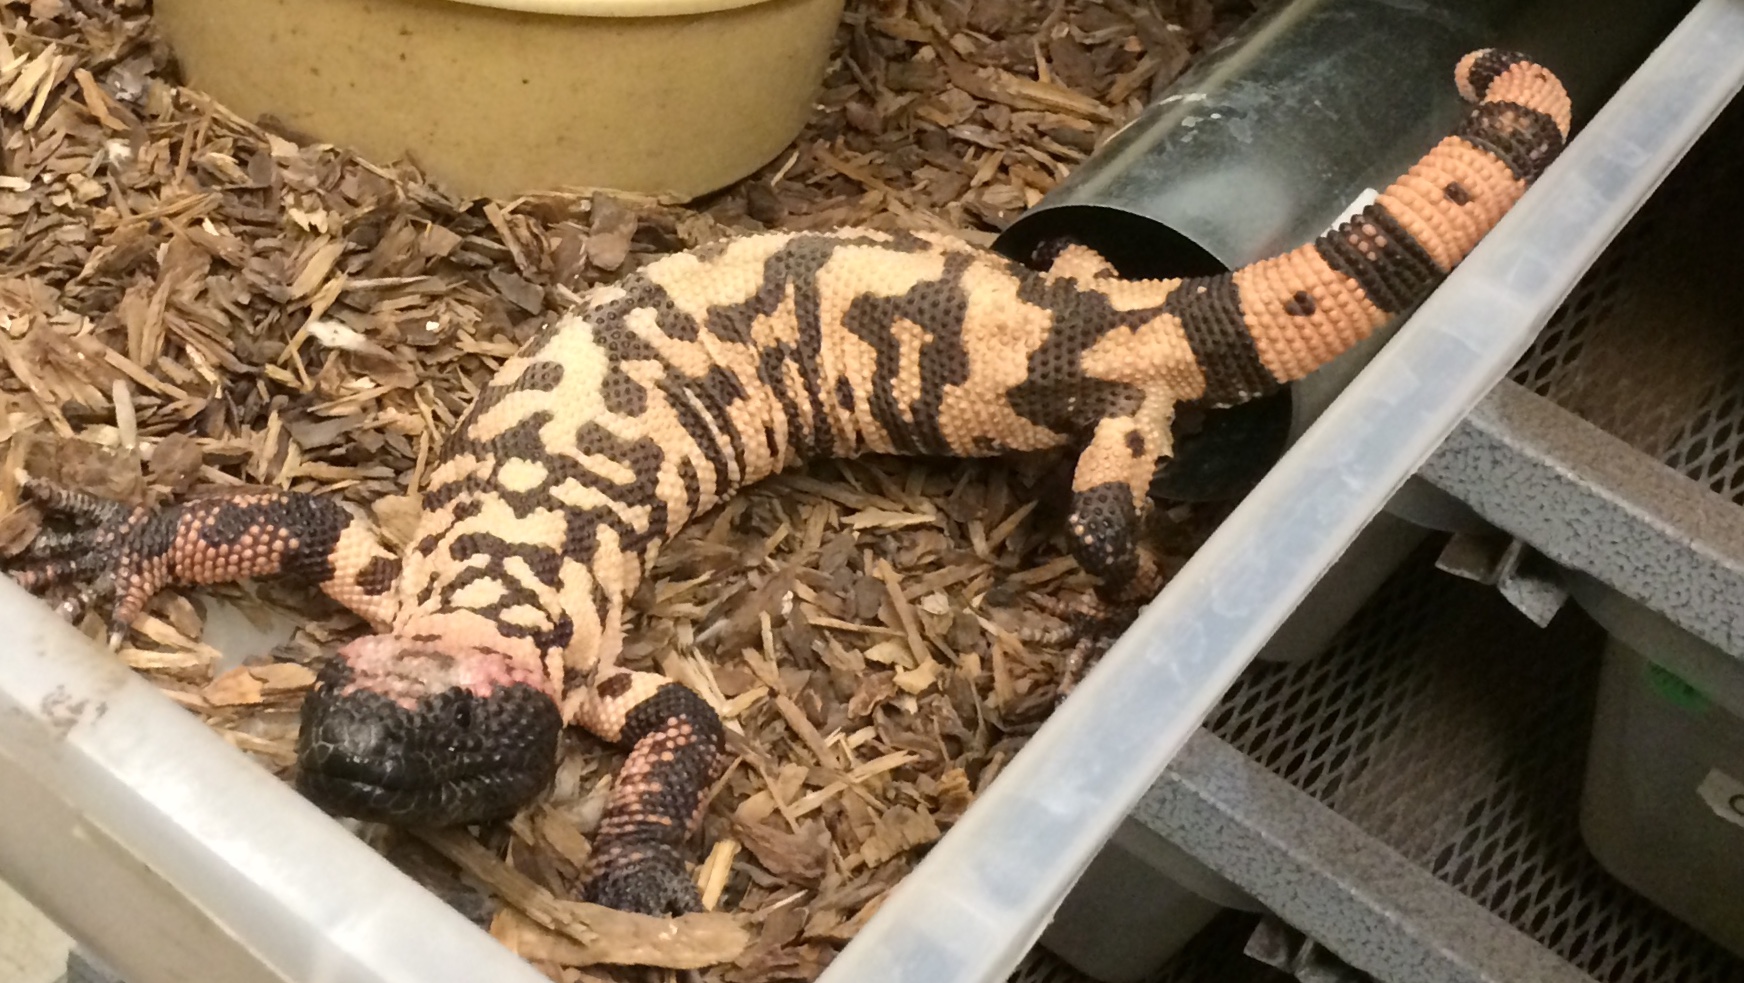 A Gila monster in it's laboratory home